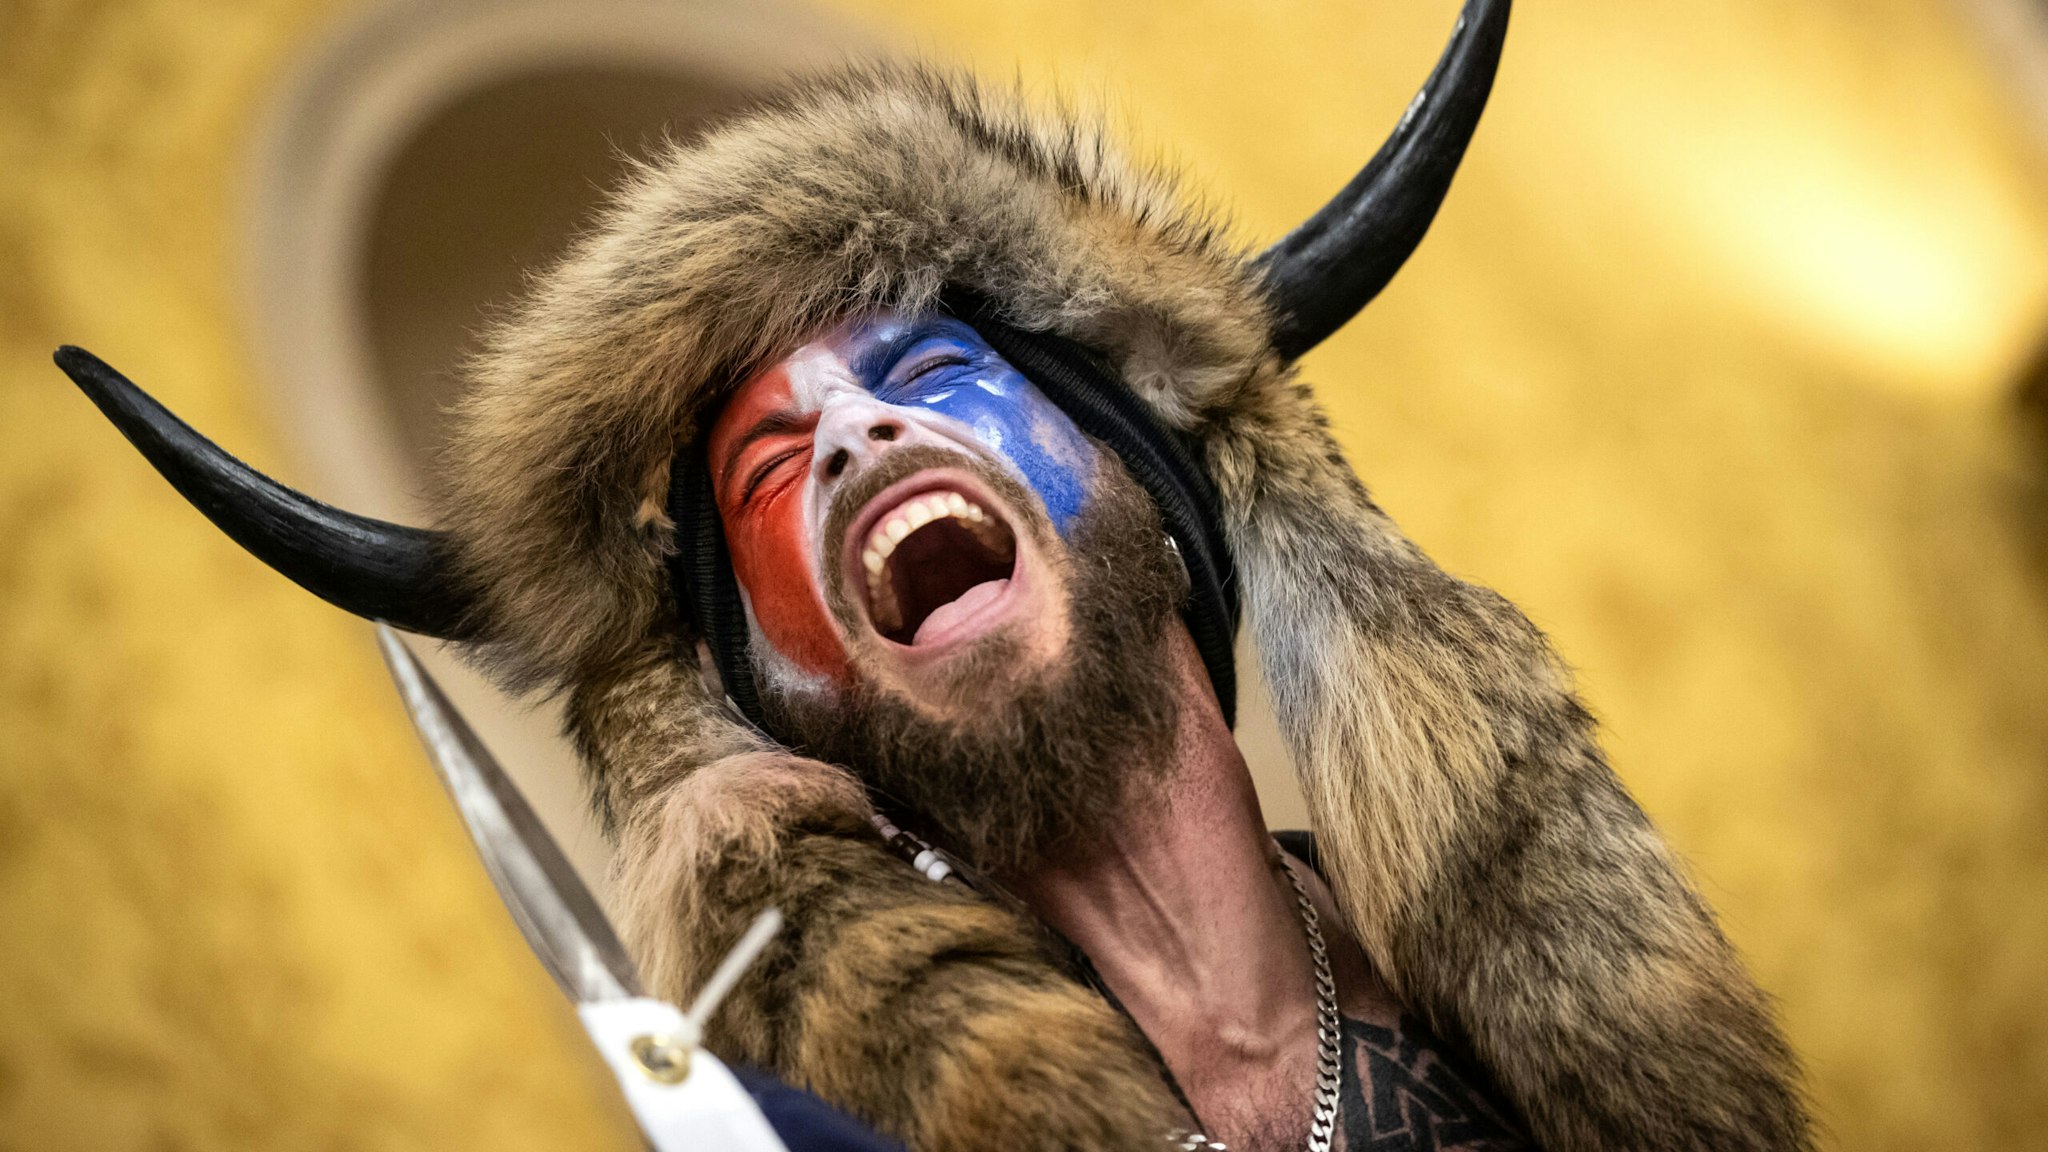 WASHINGTON, DC - JANUARY 06: Jacob Chansley, also known as the "QAnon Shaman," screams "Freedom" inside the U.S. Senate chamber after the U.S. Capitol was breached by a mob during a joint session of Congress on January 6, 2021 in Washington, DC. Congress held a joint session to ratify President-elect Joe Biden's 306-232 Electoral College win over President Donald Trump. Pro-Trump protesters illegally entered the U.S. Capitol building following rallies in the nation's capital.